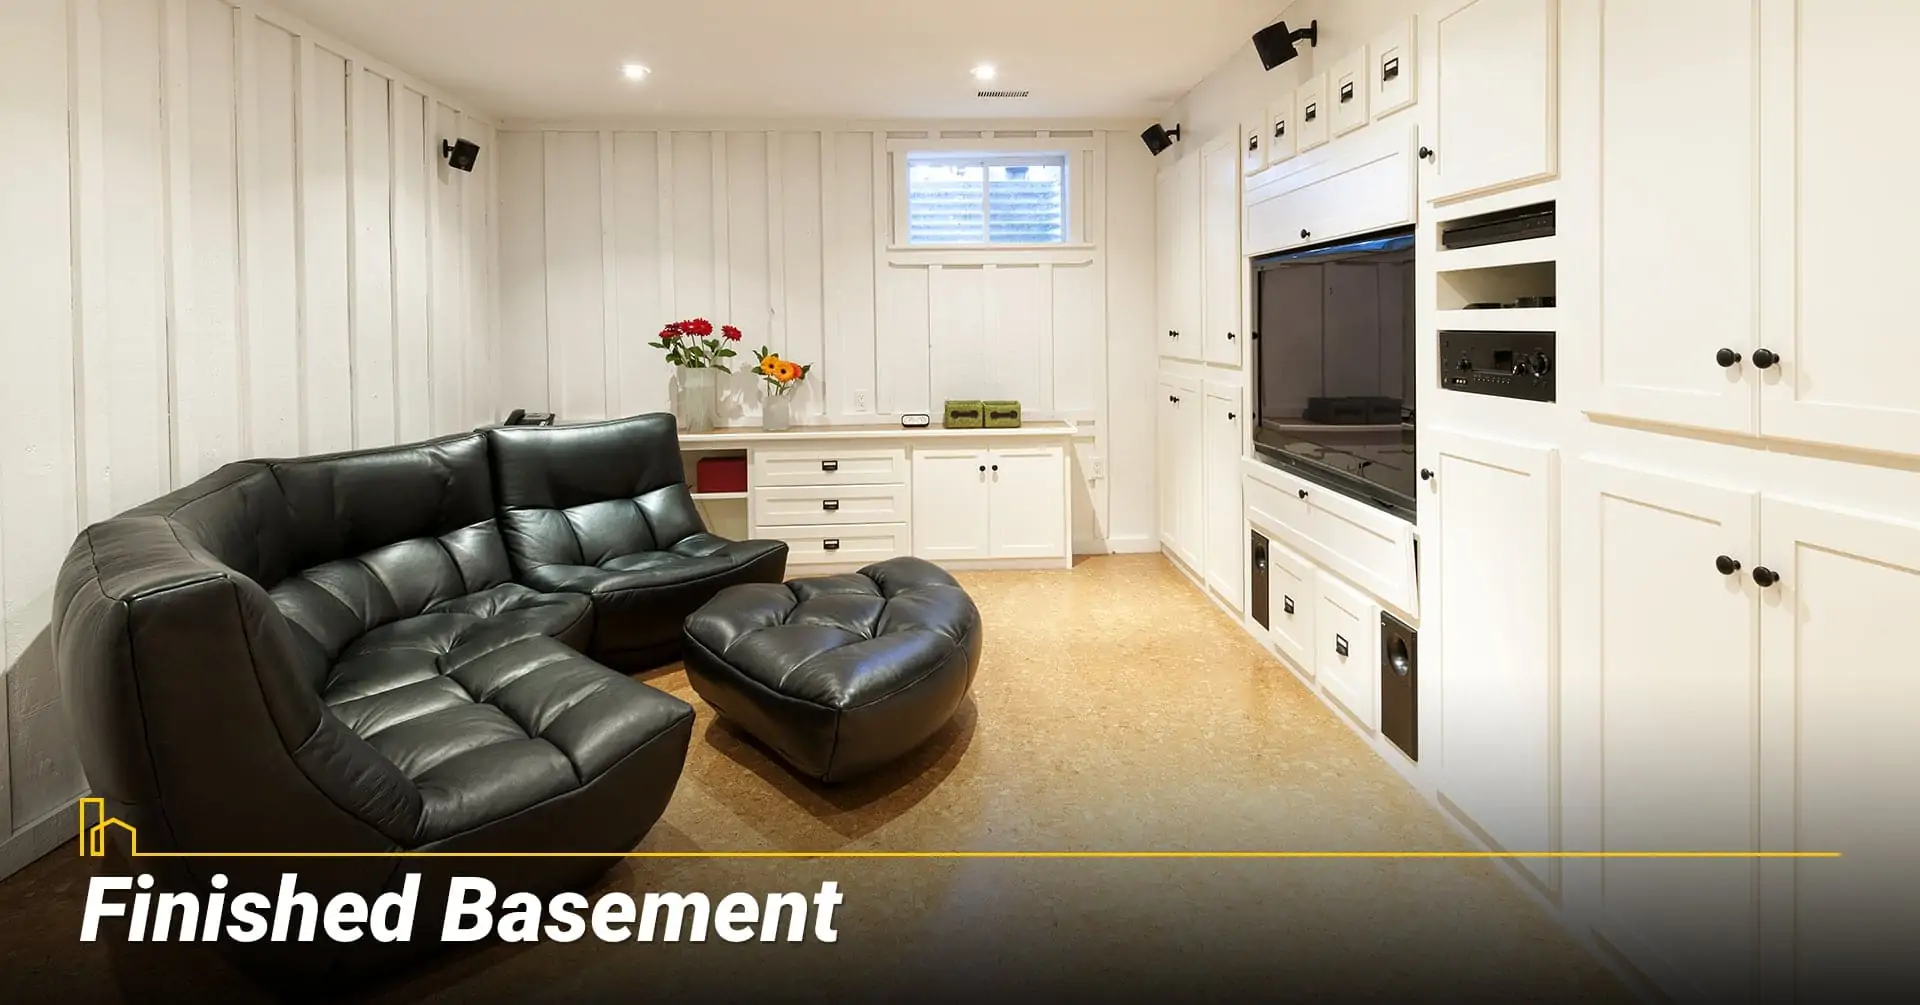 Finished Basement, finished and decorate your basement